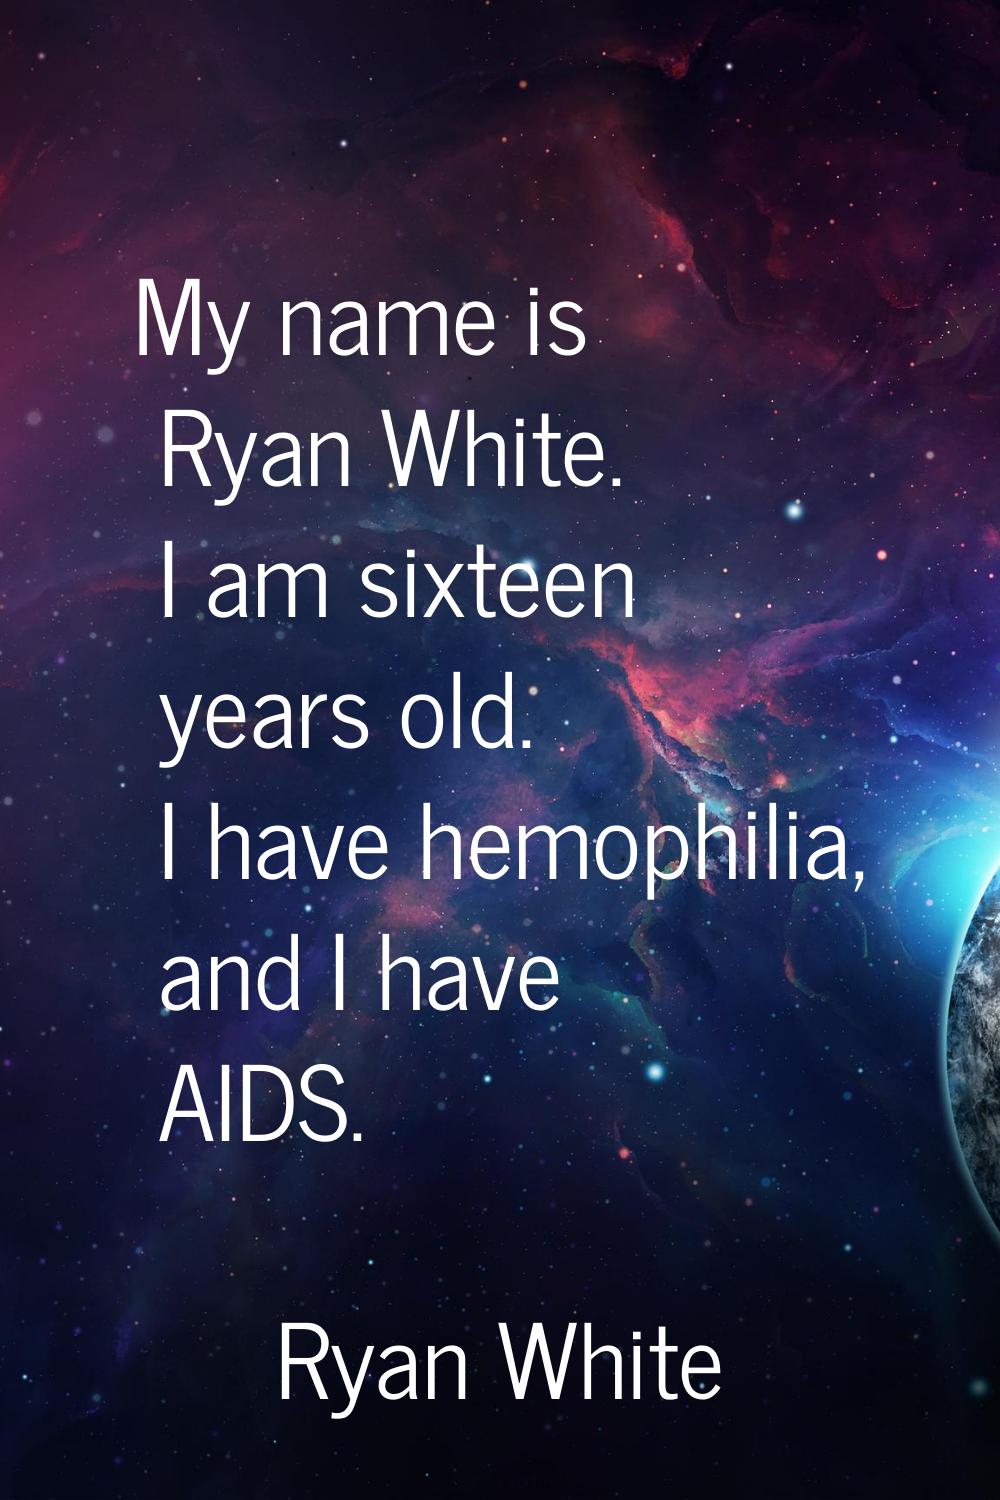 My name is Ryan White. I am sixteen years old. I have hemophilia, and I have AIDS.